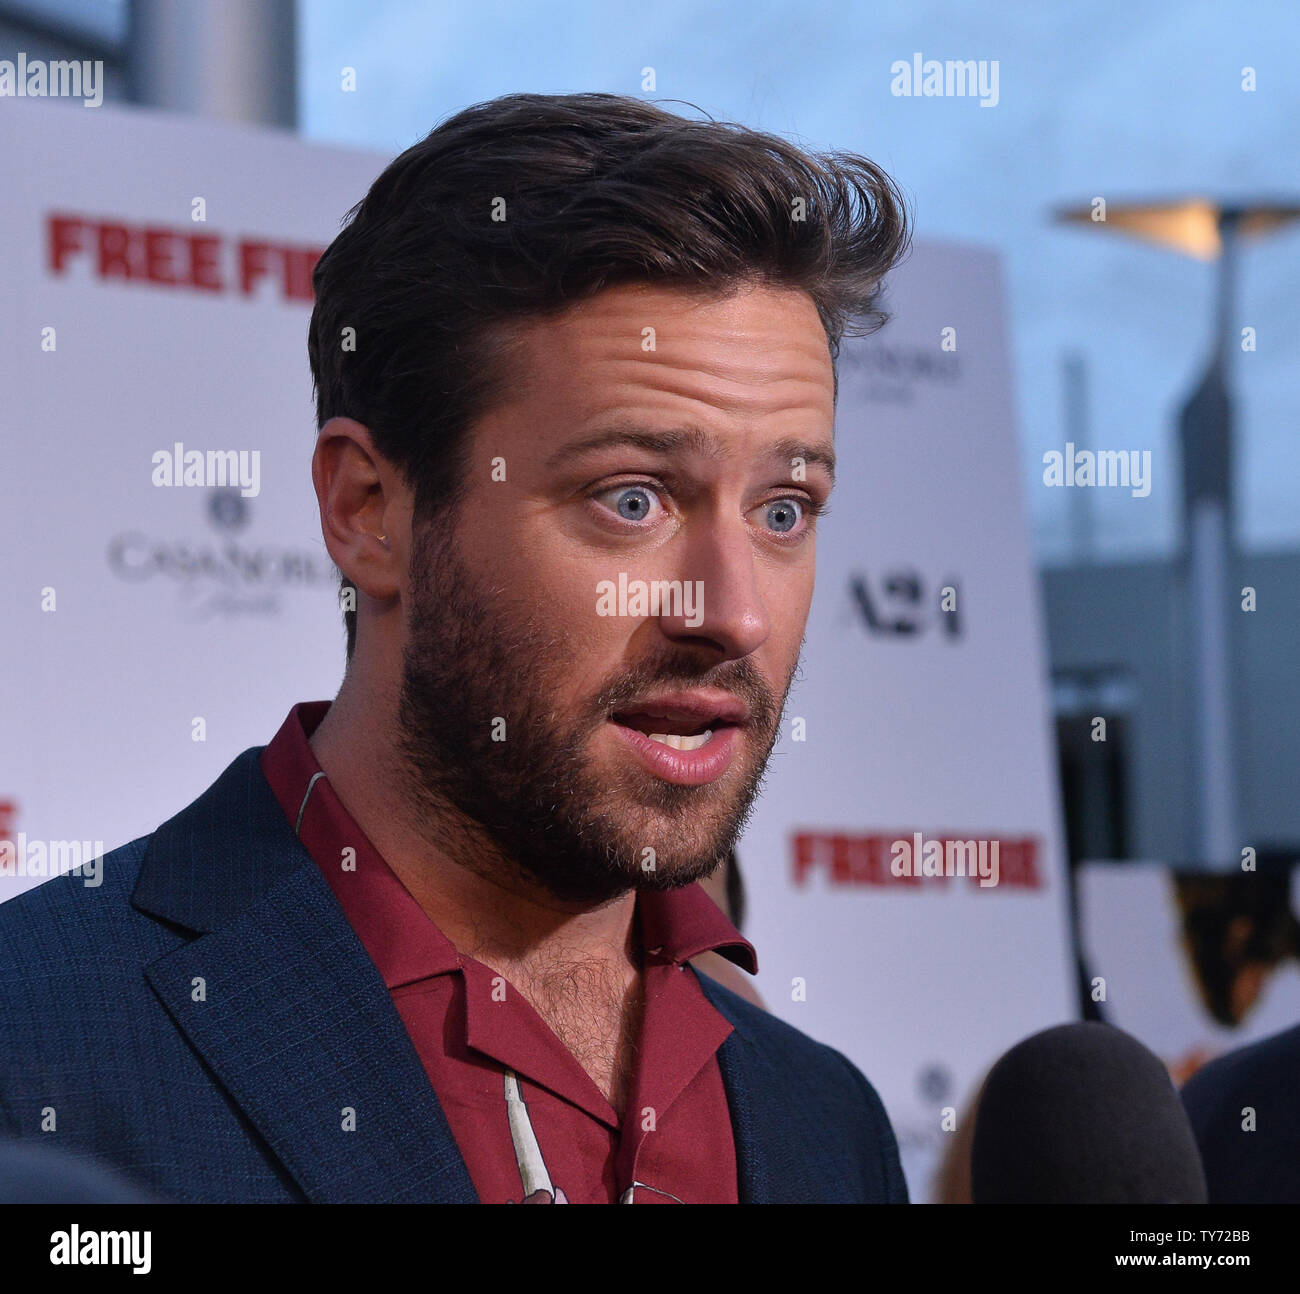 Cast Member Armie Hammer Attends The Premiere Of The Motion Picture Crime Thriller Free Fire At The Arclight Cinema Dome In The Hollywood Section Of Los Angeles On April 13 2017 Storyline